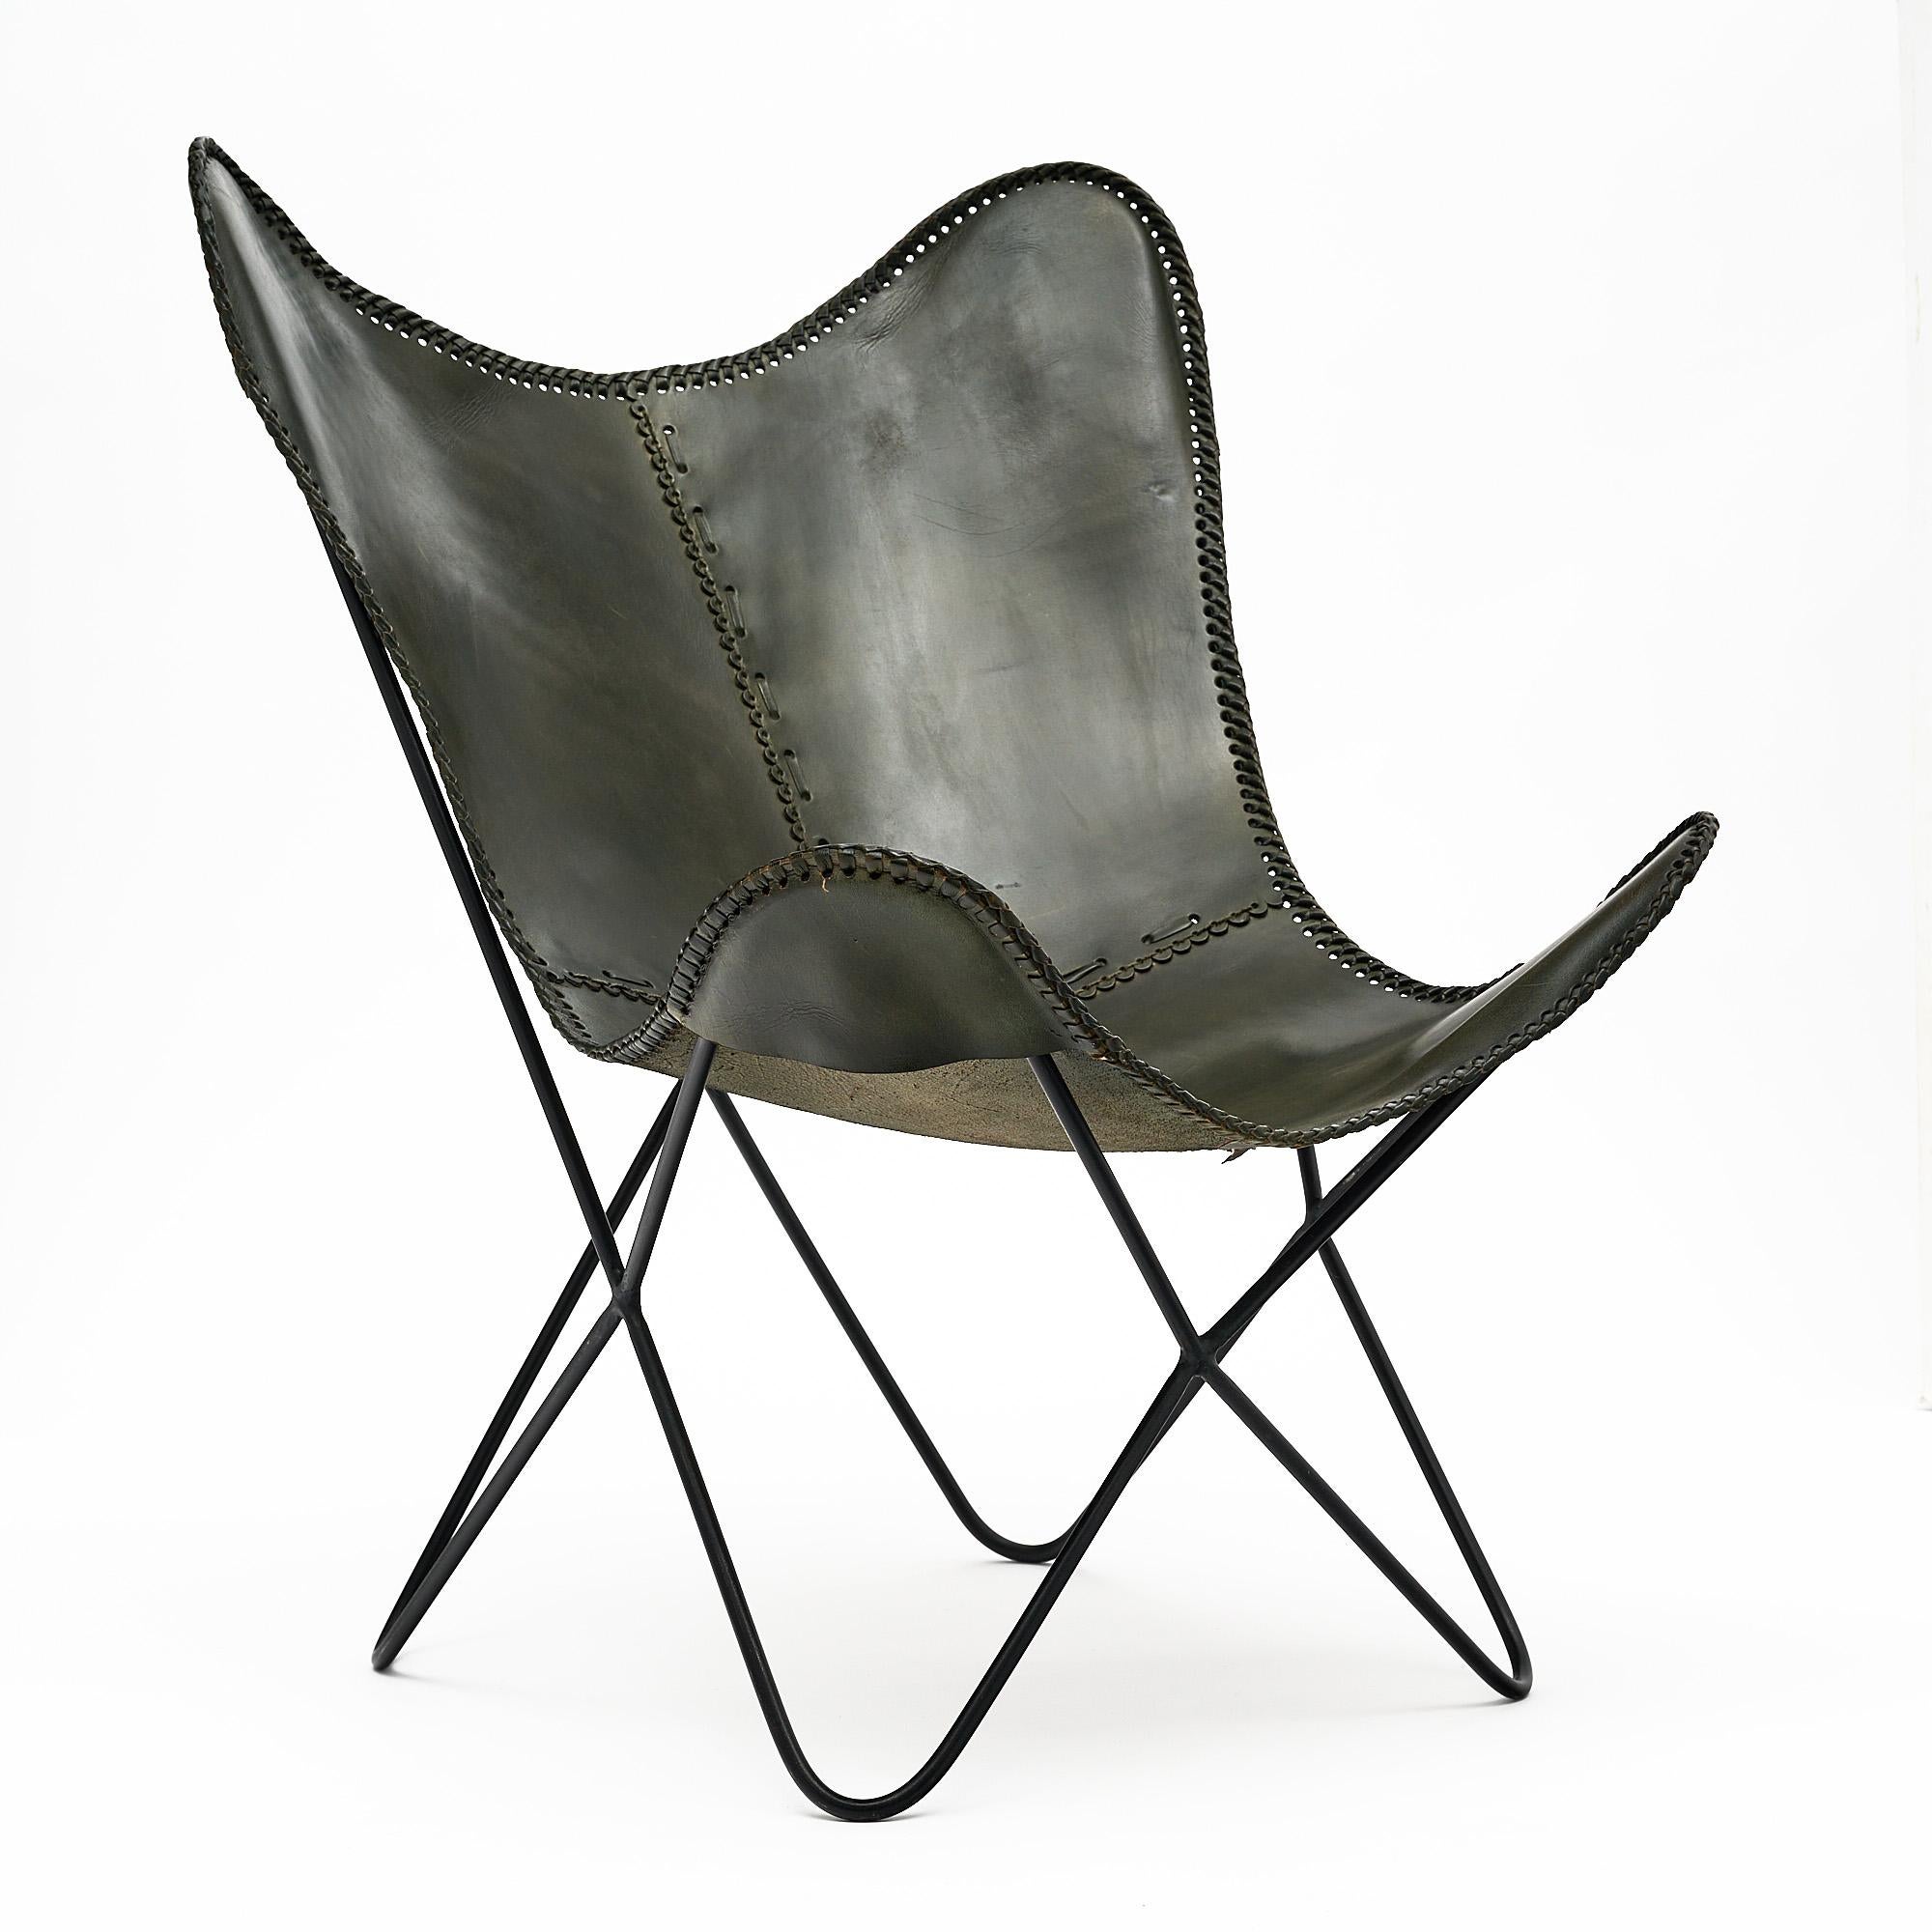 BKF chair, also known as butterfly chair by Jorge Ferrari Hardoy for Knoll. This piece is made of painted wrought iron and the seat is the original leather with detailing throughout.